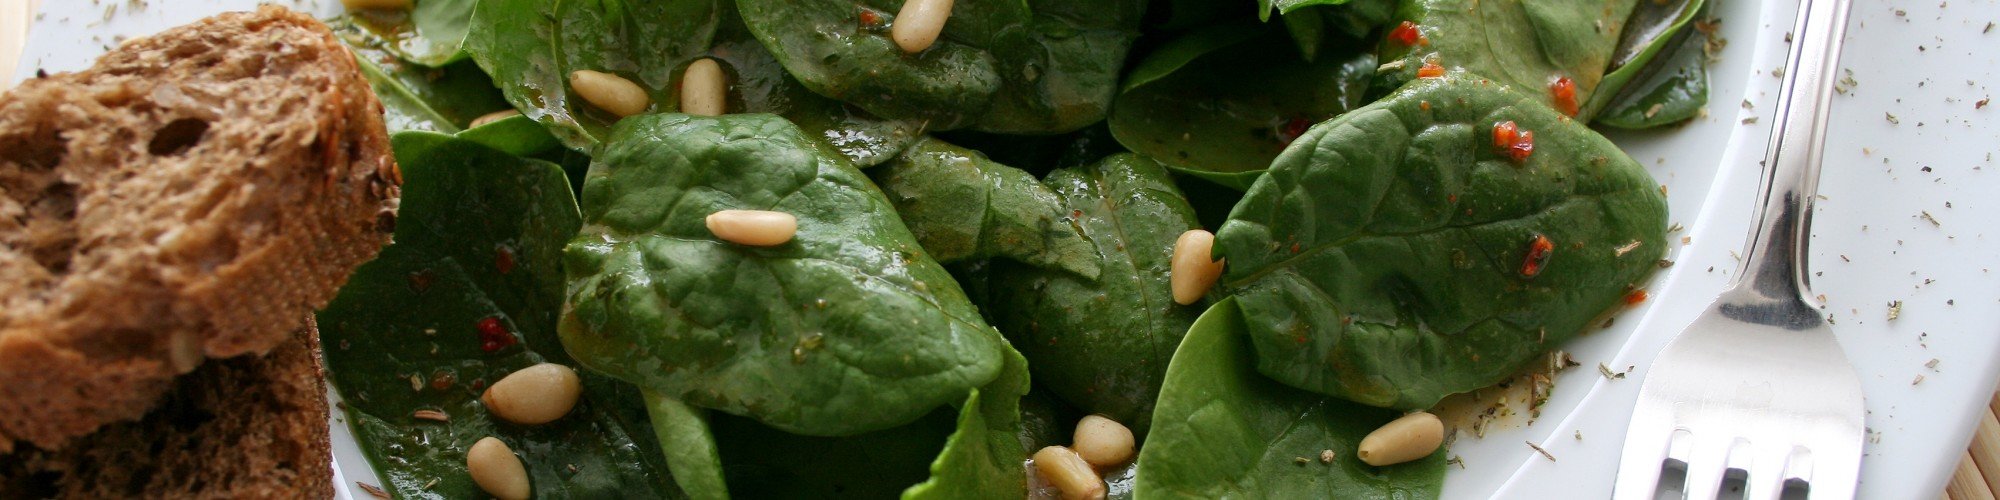 Spinach and Basil Salad with Pine Nut Dressing Recipe by Vicki Barrett